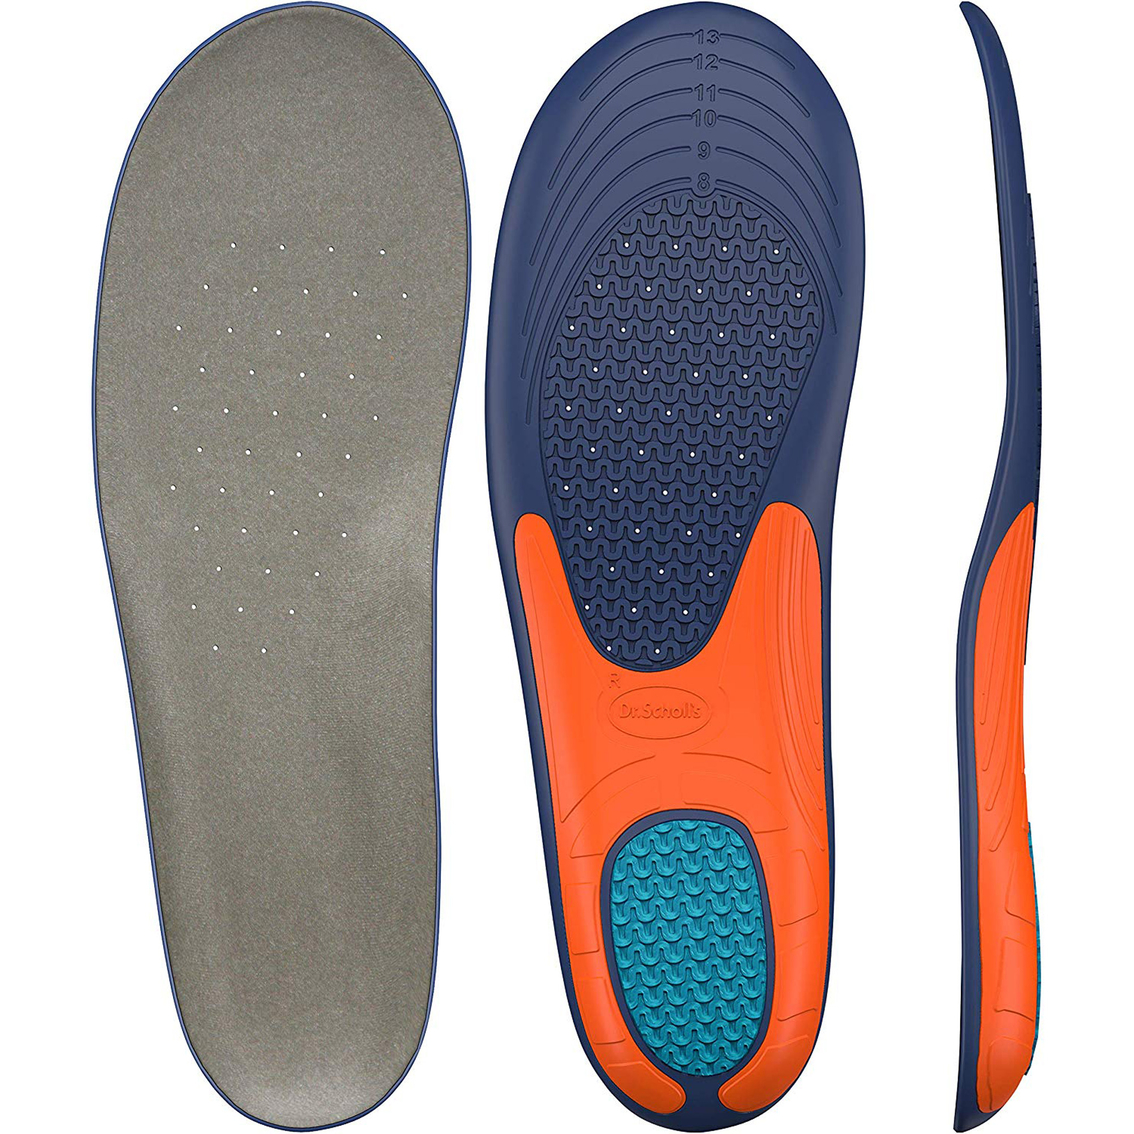 Dr. Scholl's Comfort and Energy Extra Support Insoles For Men - Image 3 of 3